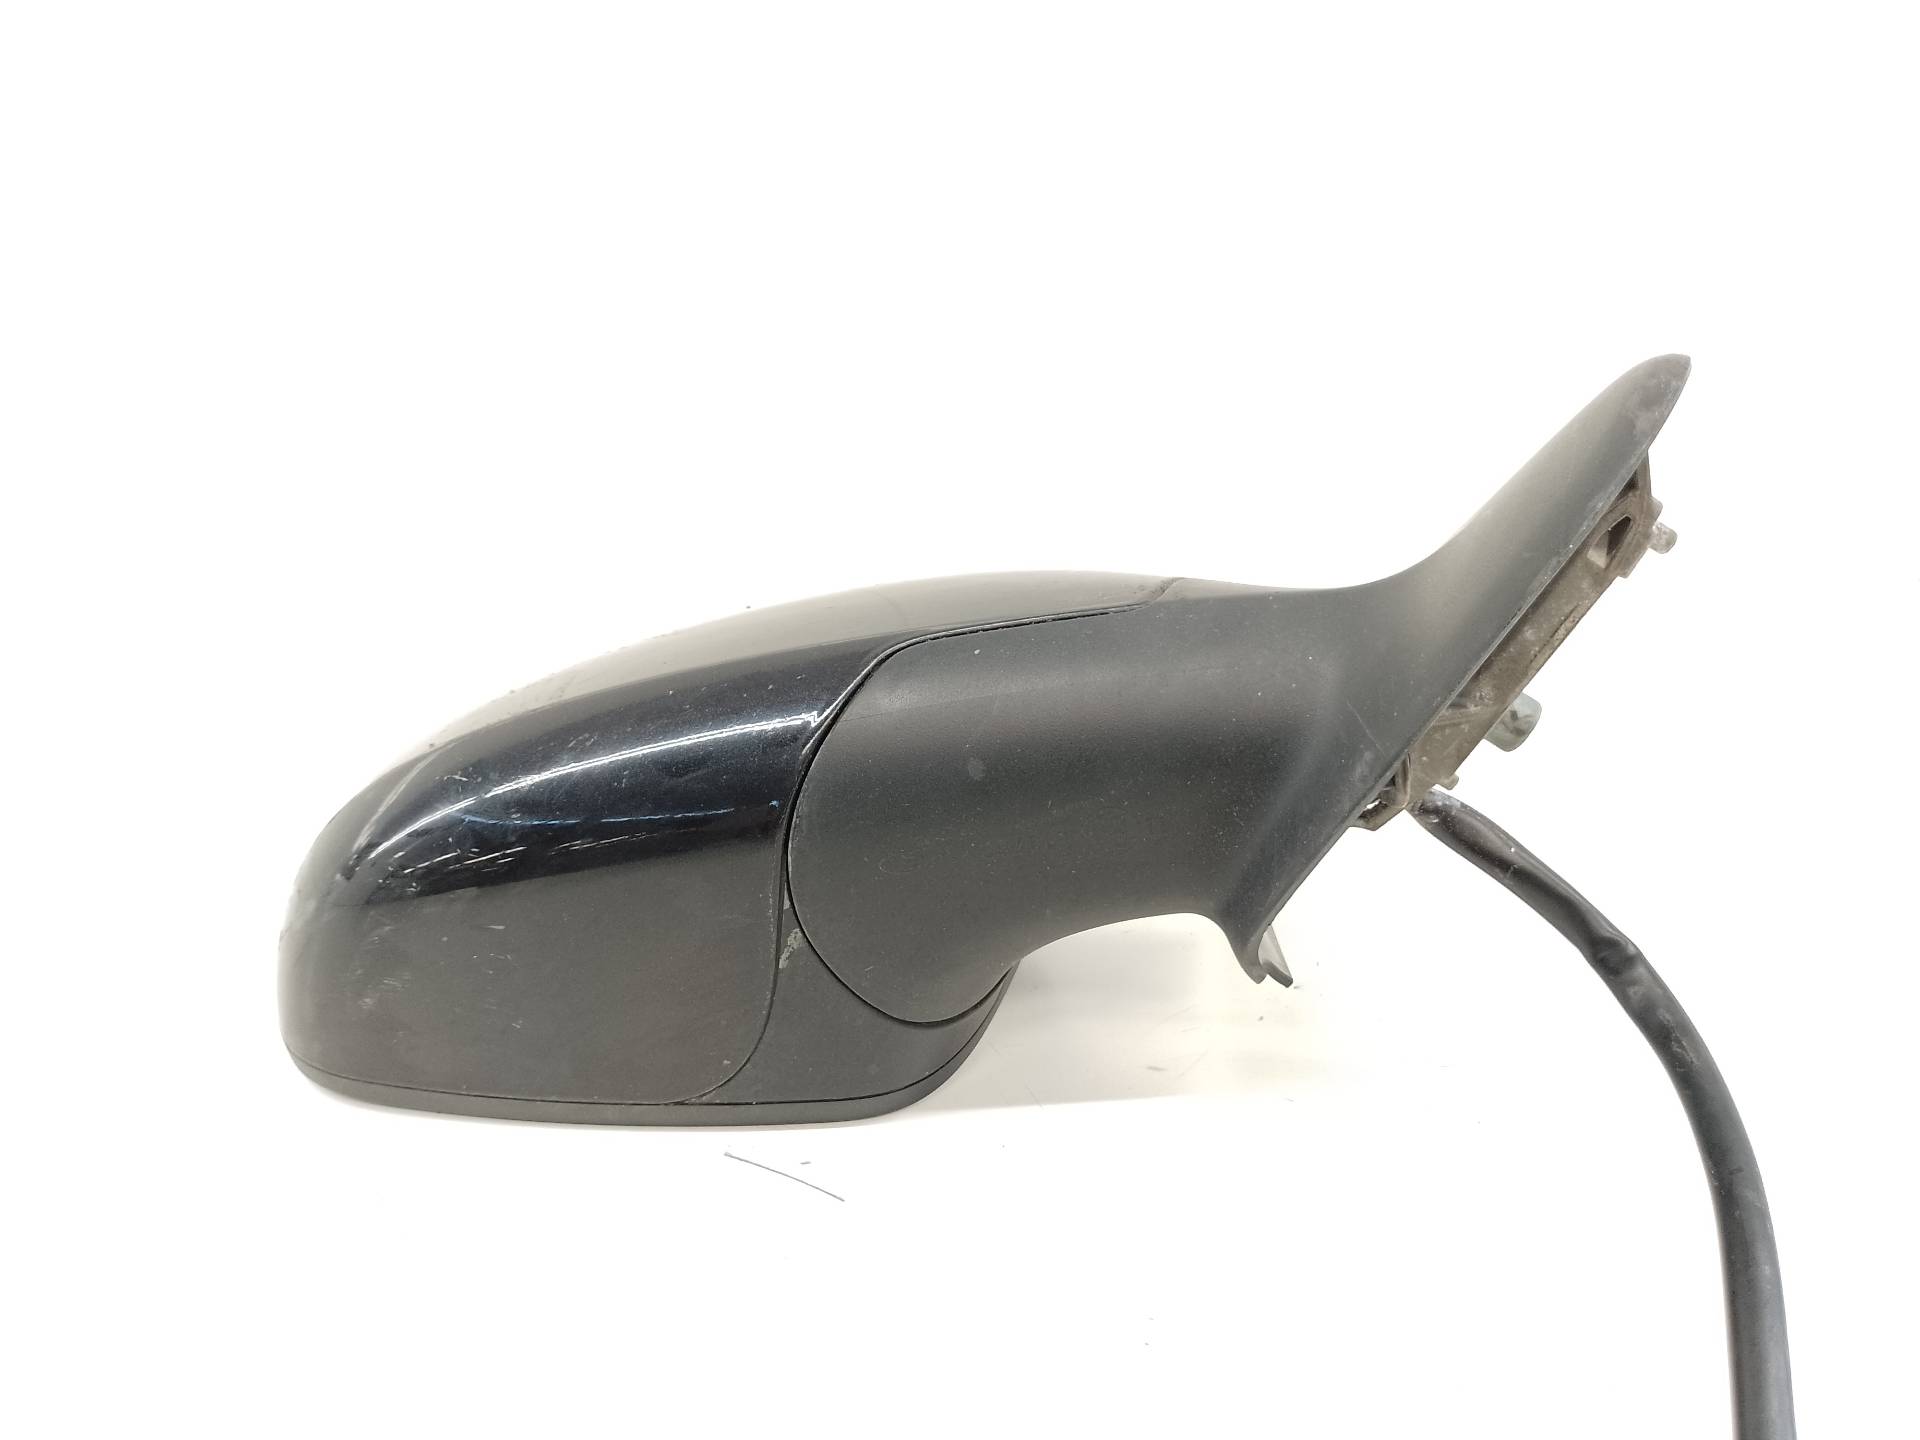 NISSAN Right Side Wing Mirror 1M2857508F01C 25427497